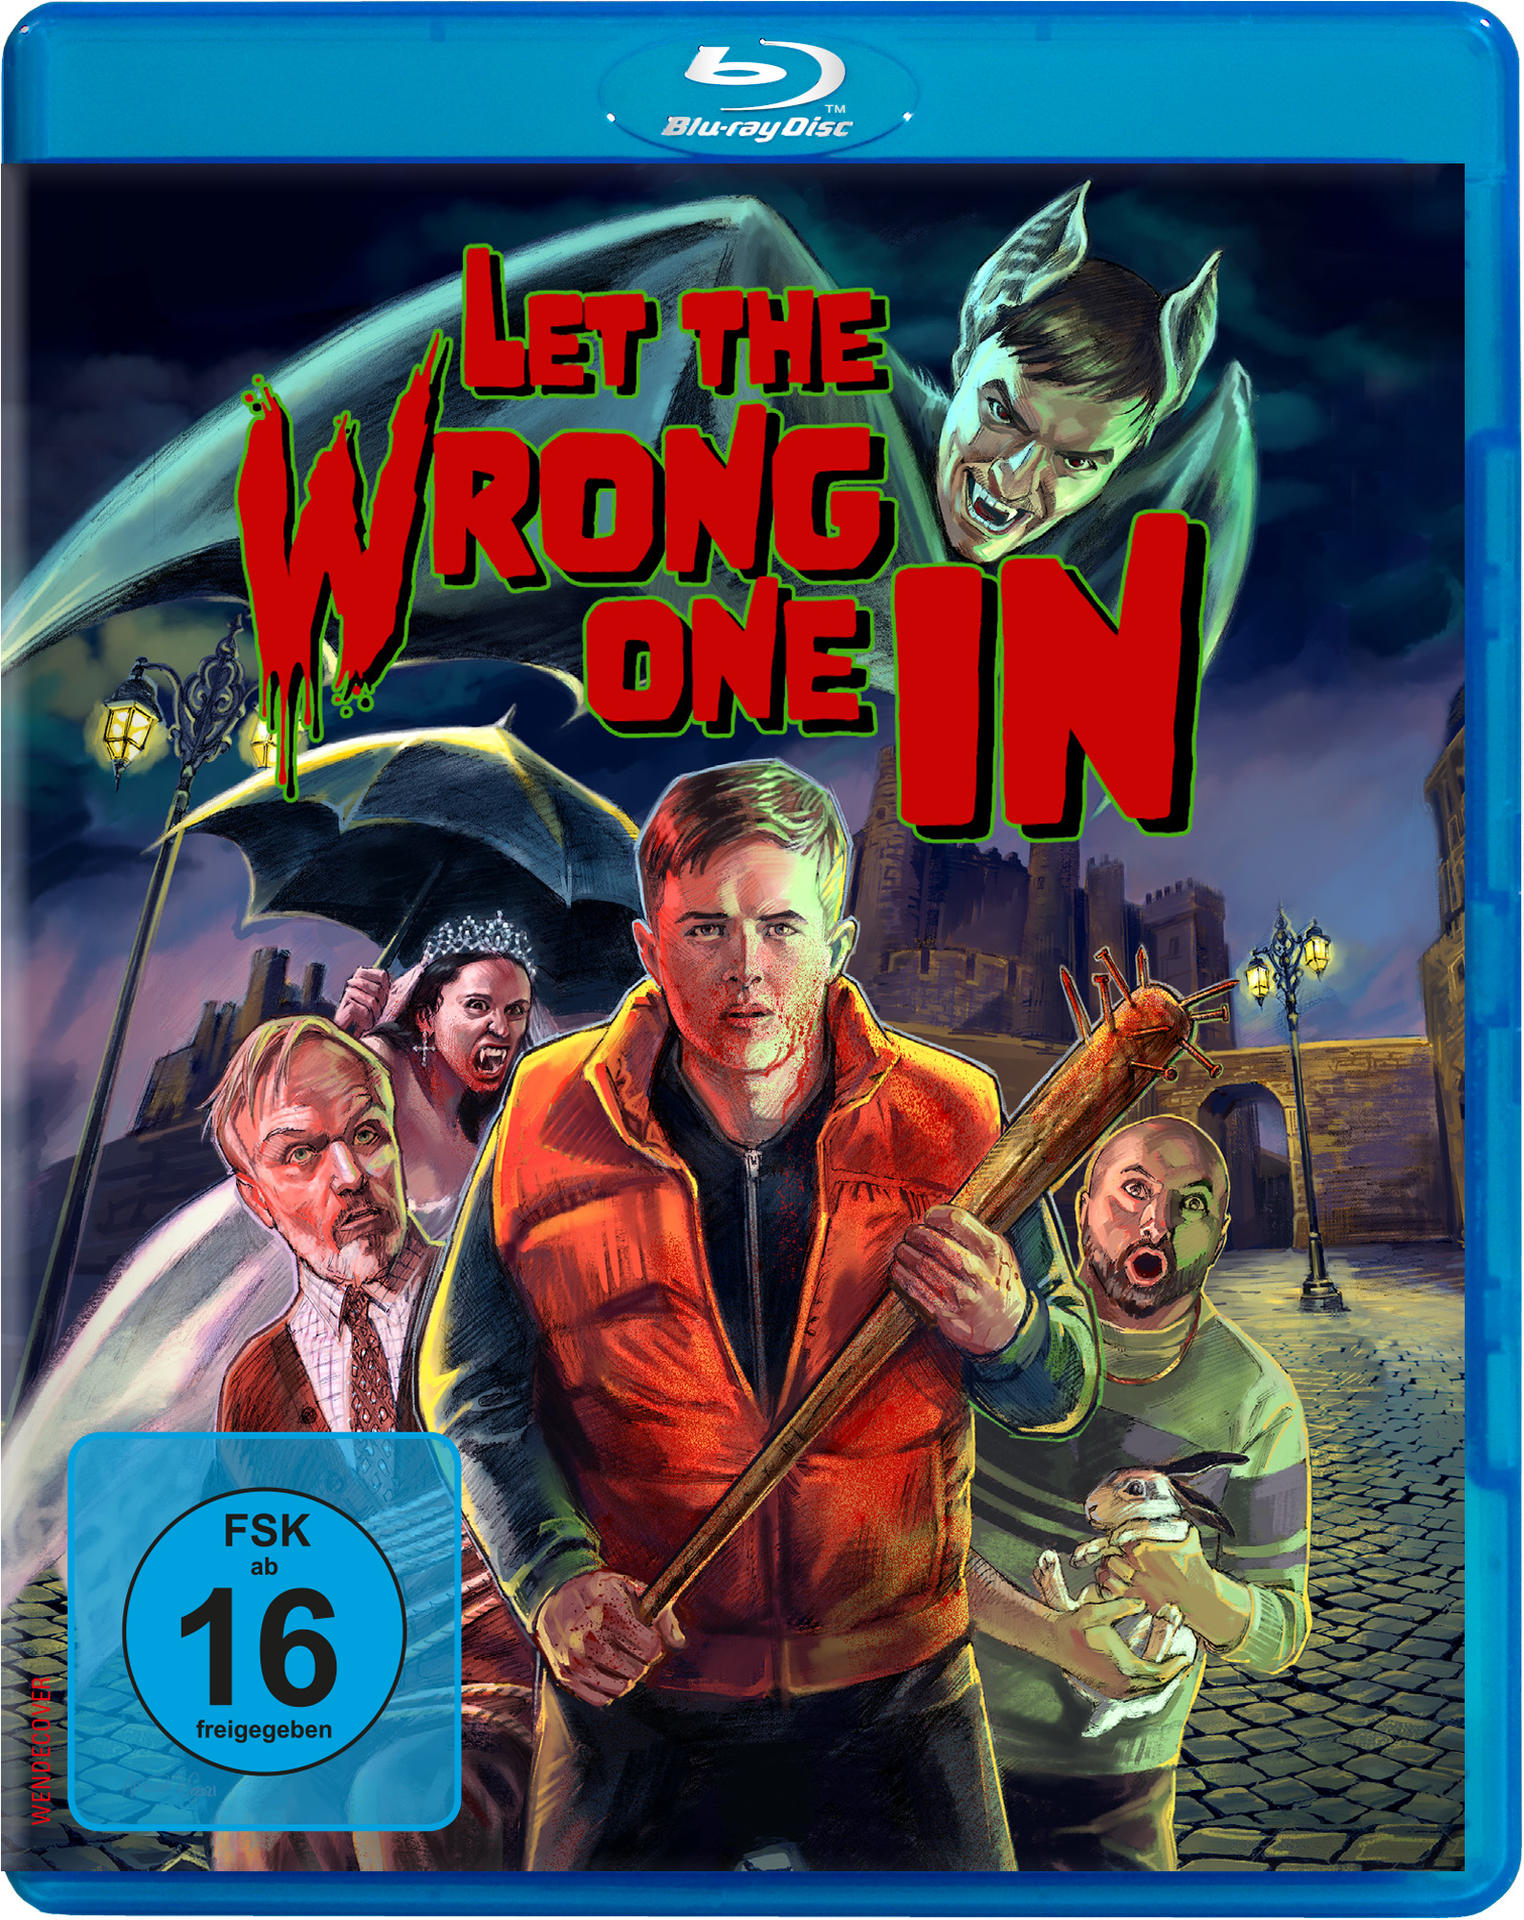 Blu-ray in Let the wrong one